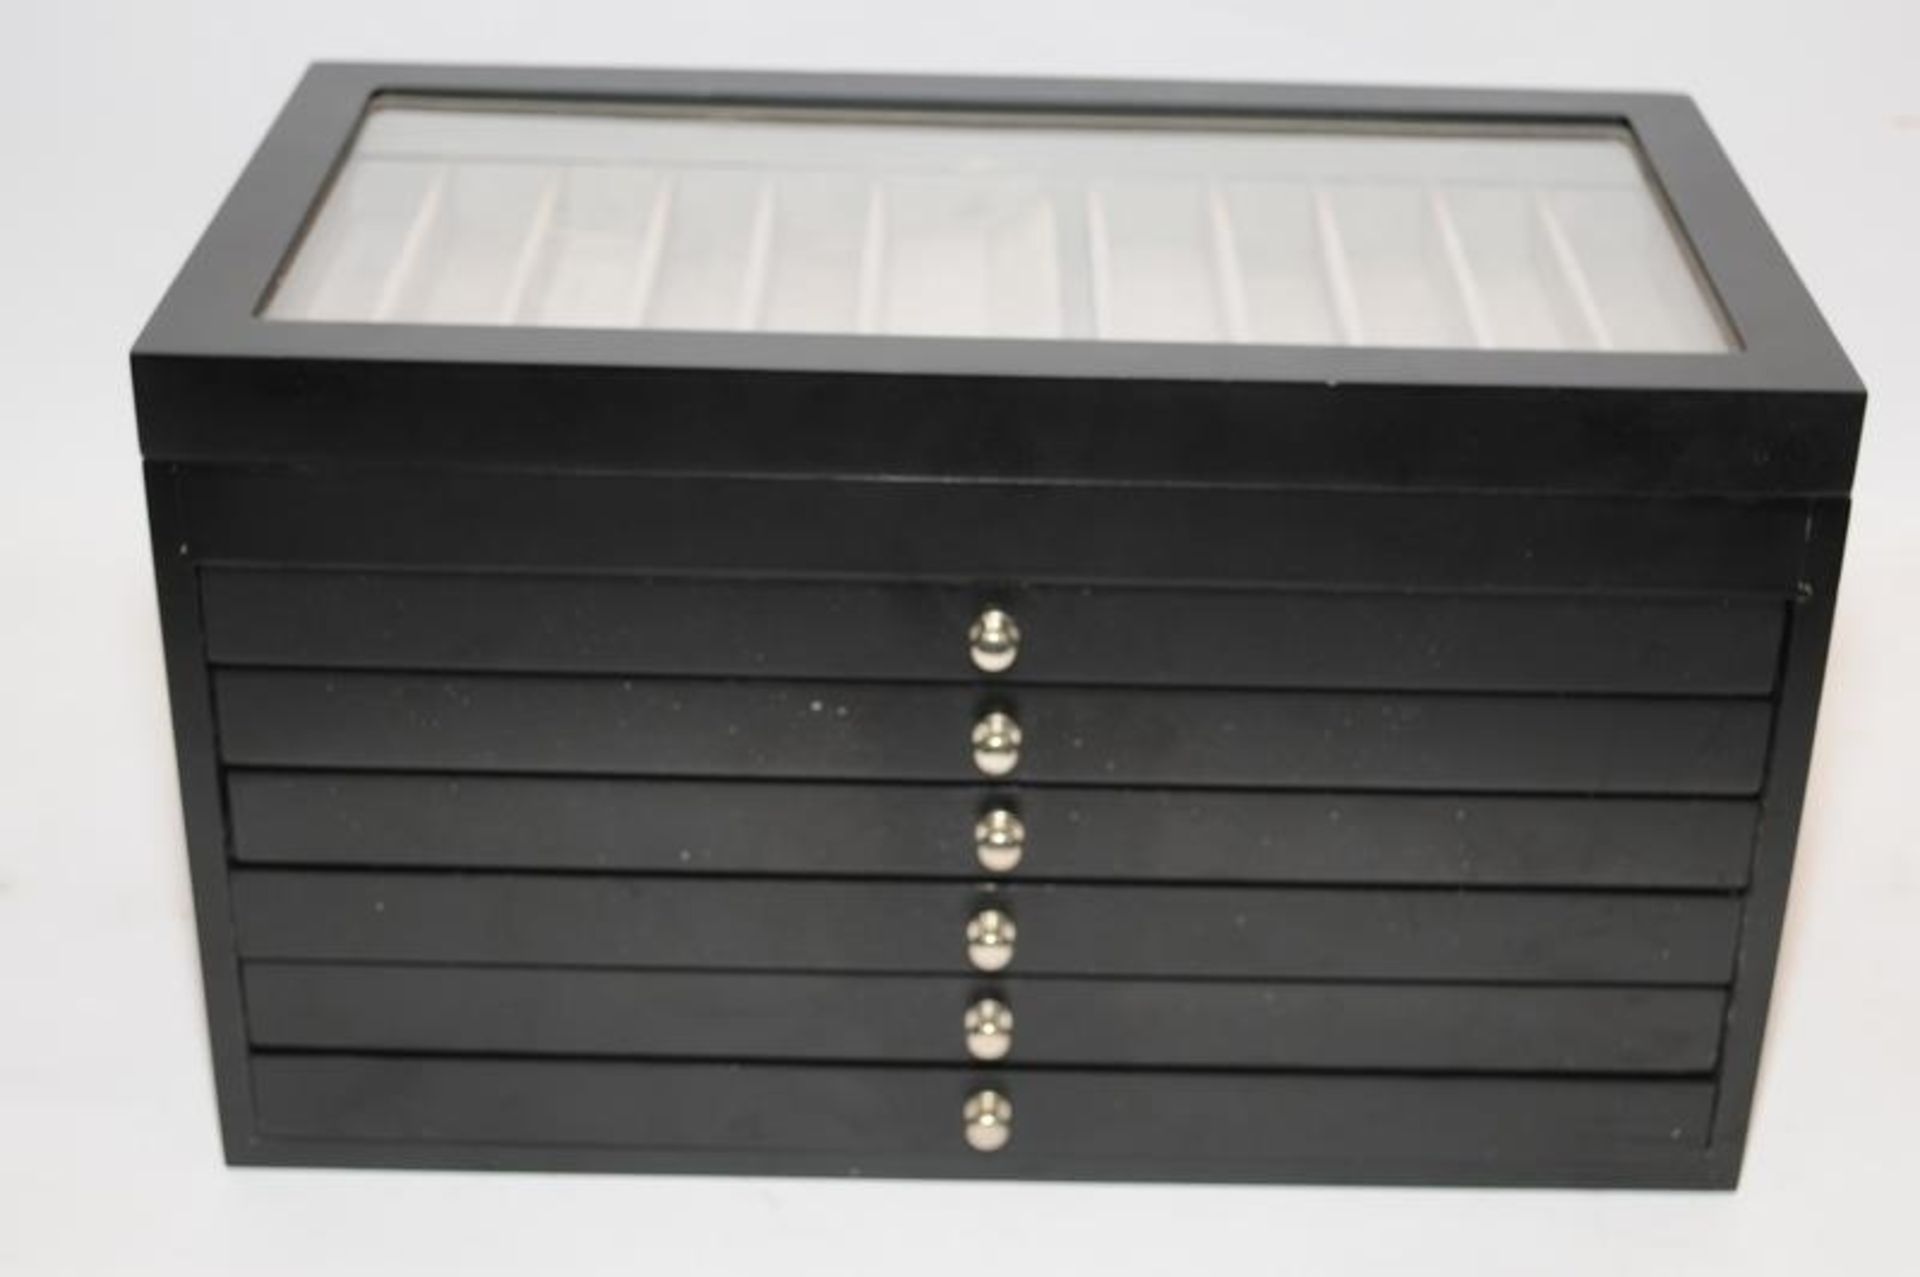 Quality storage/display box for pens. Hinged lid over 6 drawers capable of storing up to 78 pens. - Image 2 of 4